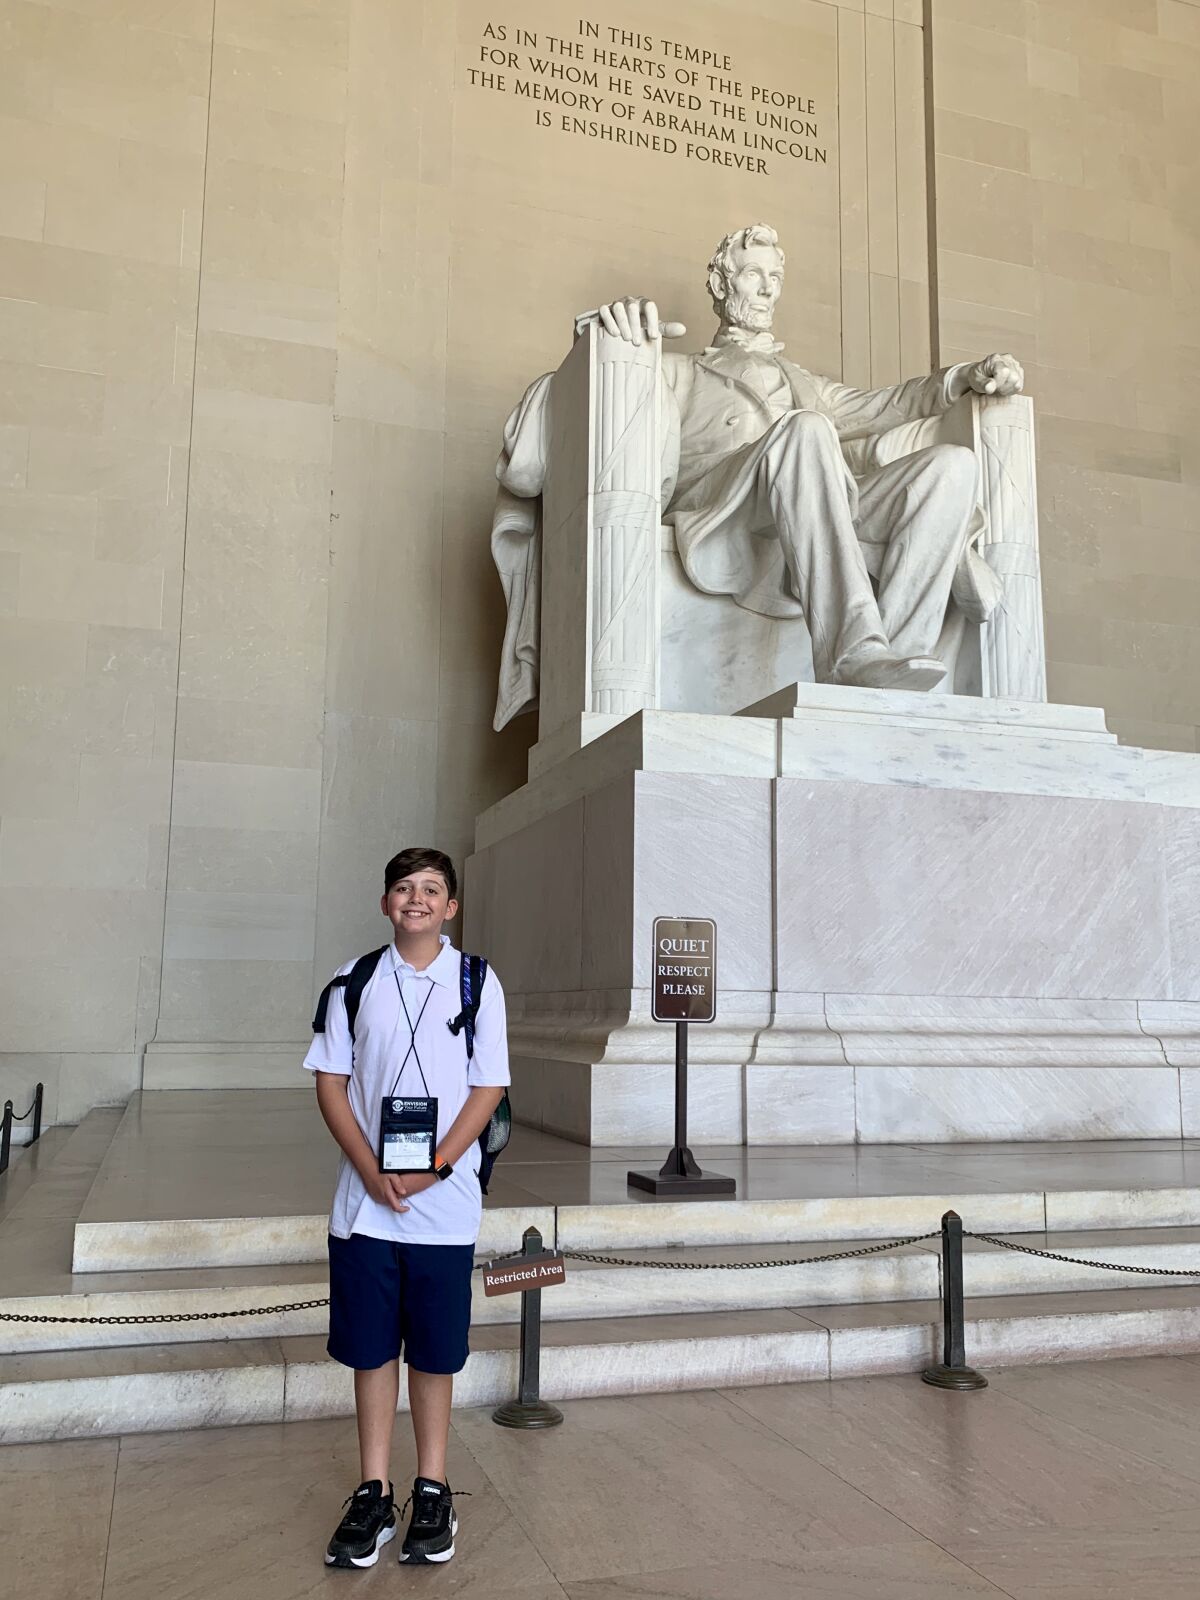 Max Prantil says he enjoyed visiting the historic sites during his first trip to Washington, D.C.